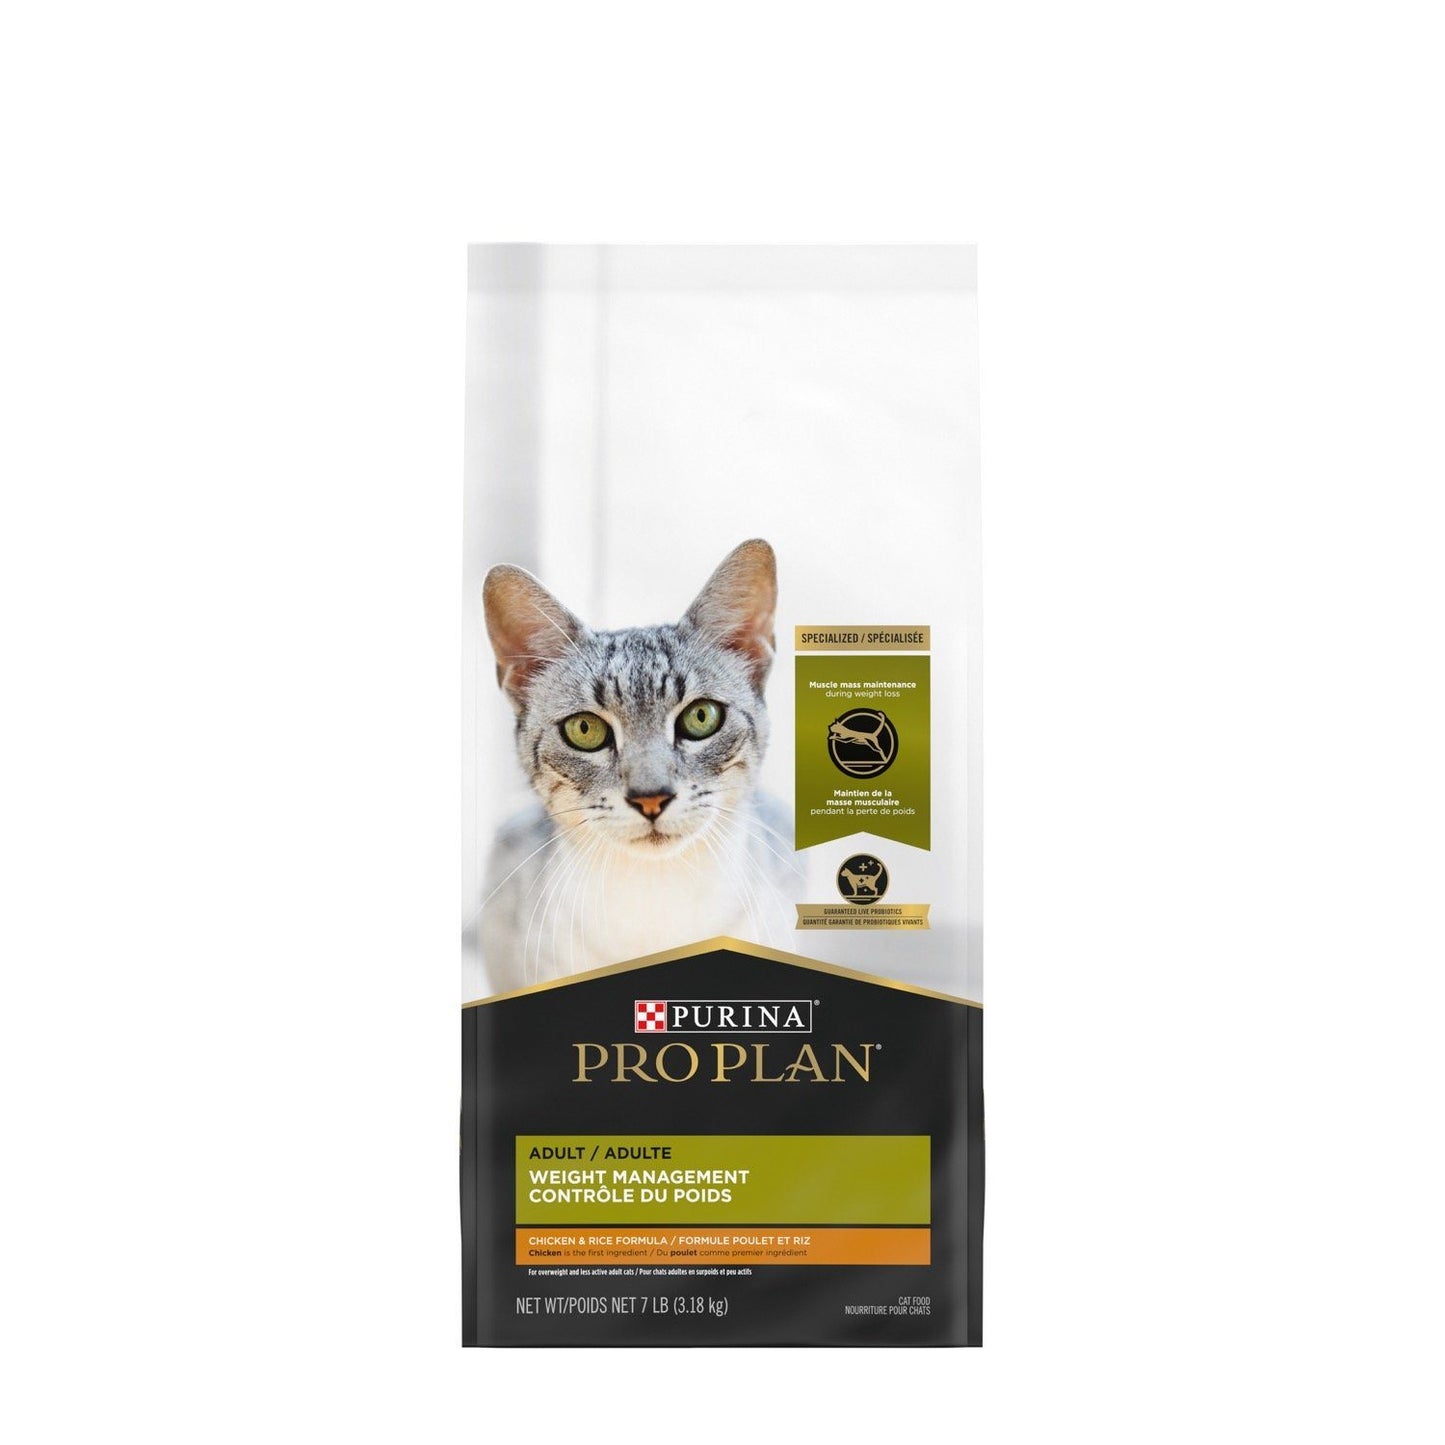 Purina Pro Plan Adult Weight Management Chicken & Rice Dry Cat Food 3.18 Kg Cat Food 3.18 Kg | PetMax Canada